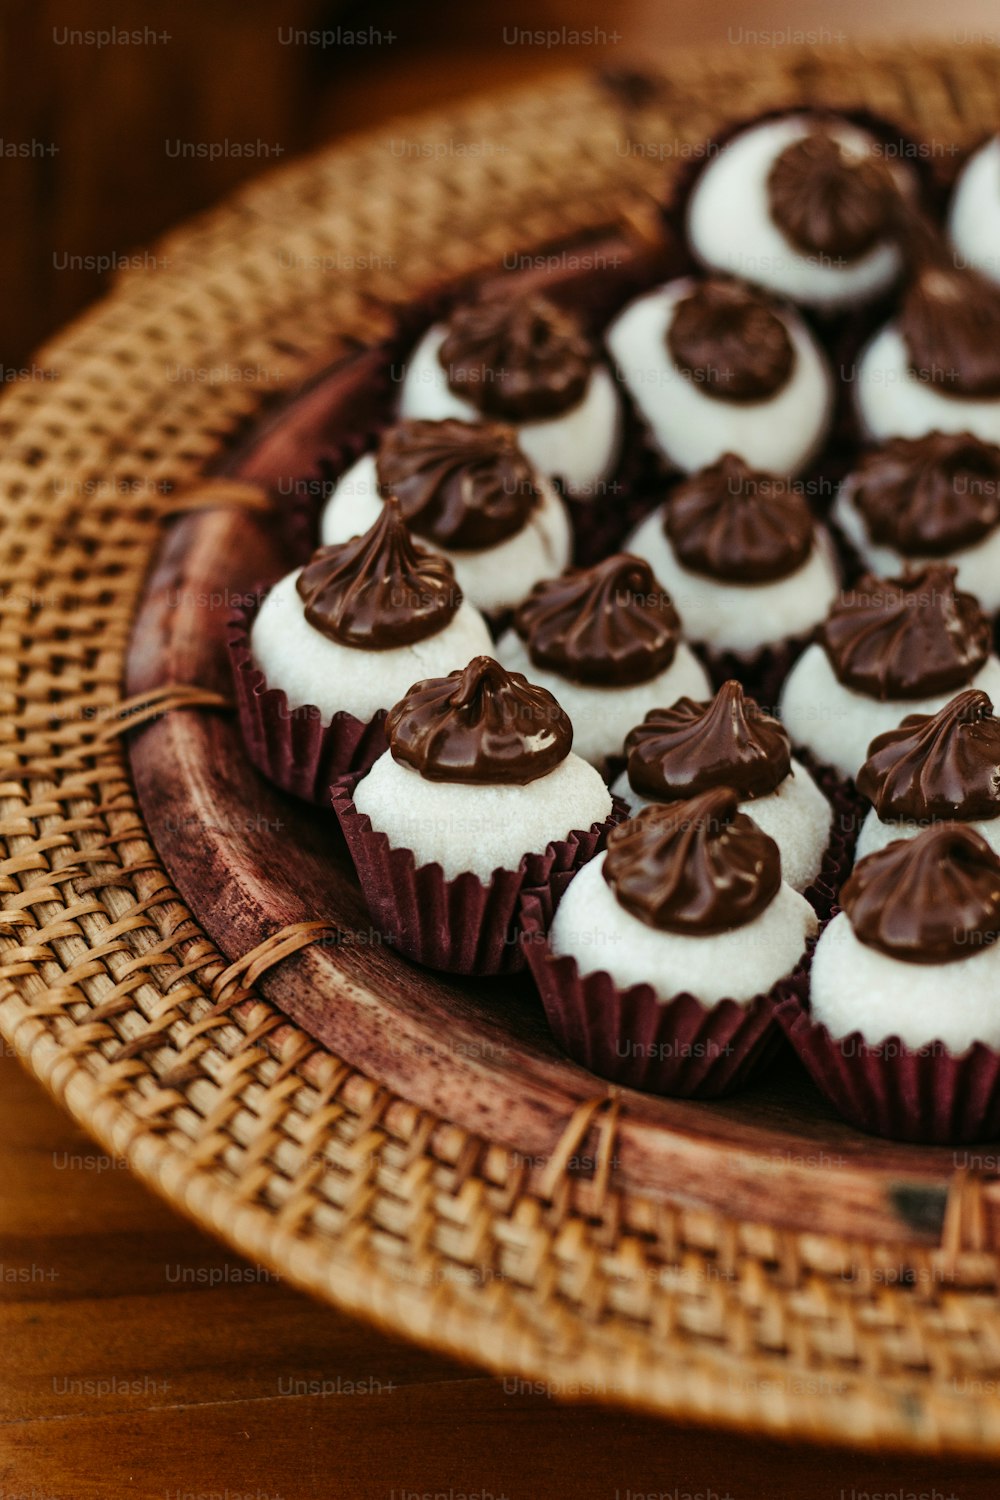 a plate of cupcakes with white frosting and chocolate decorations